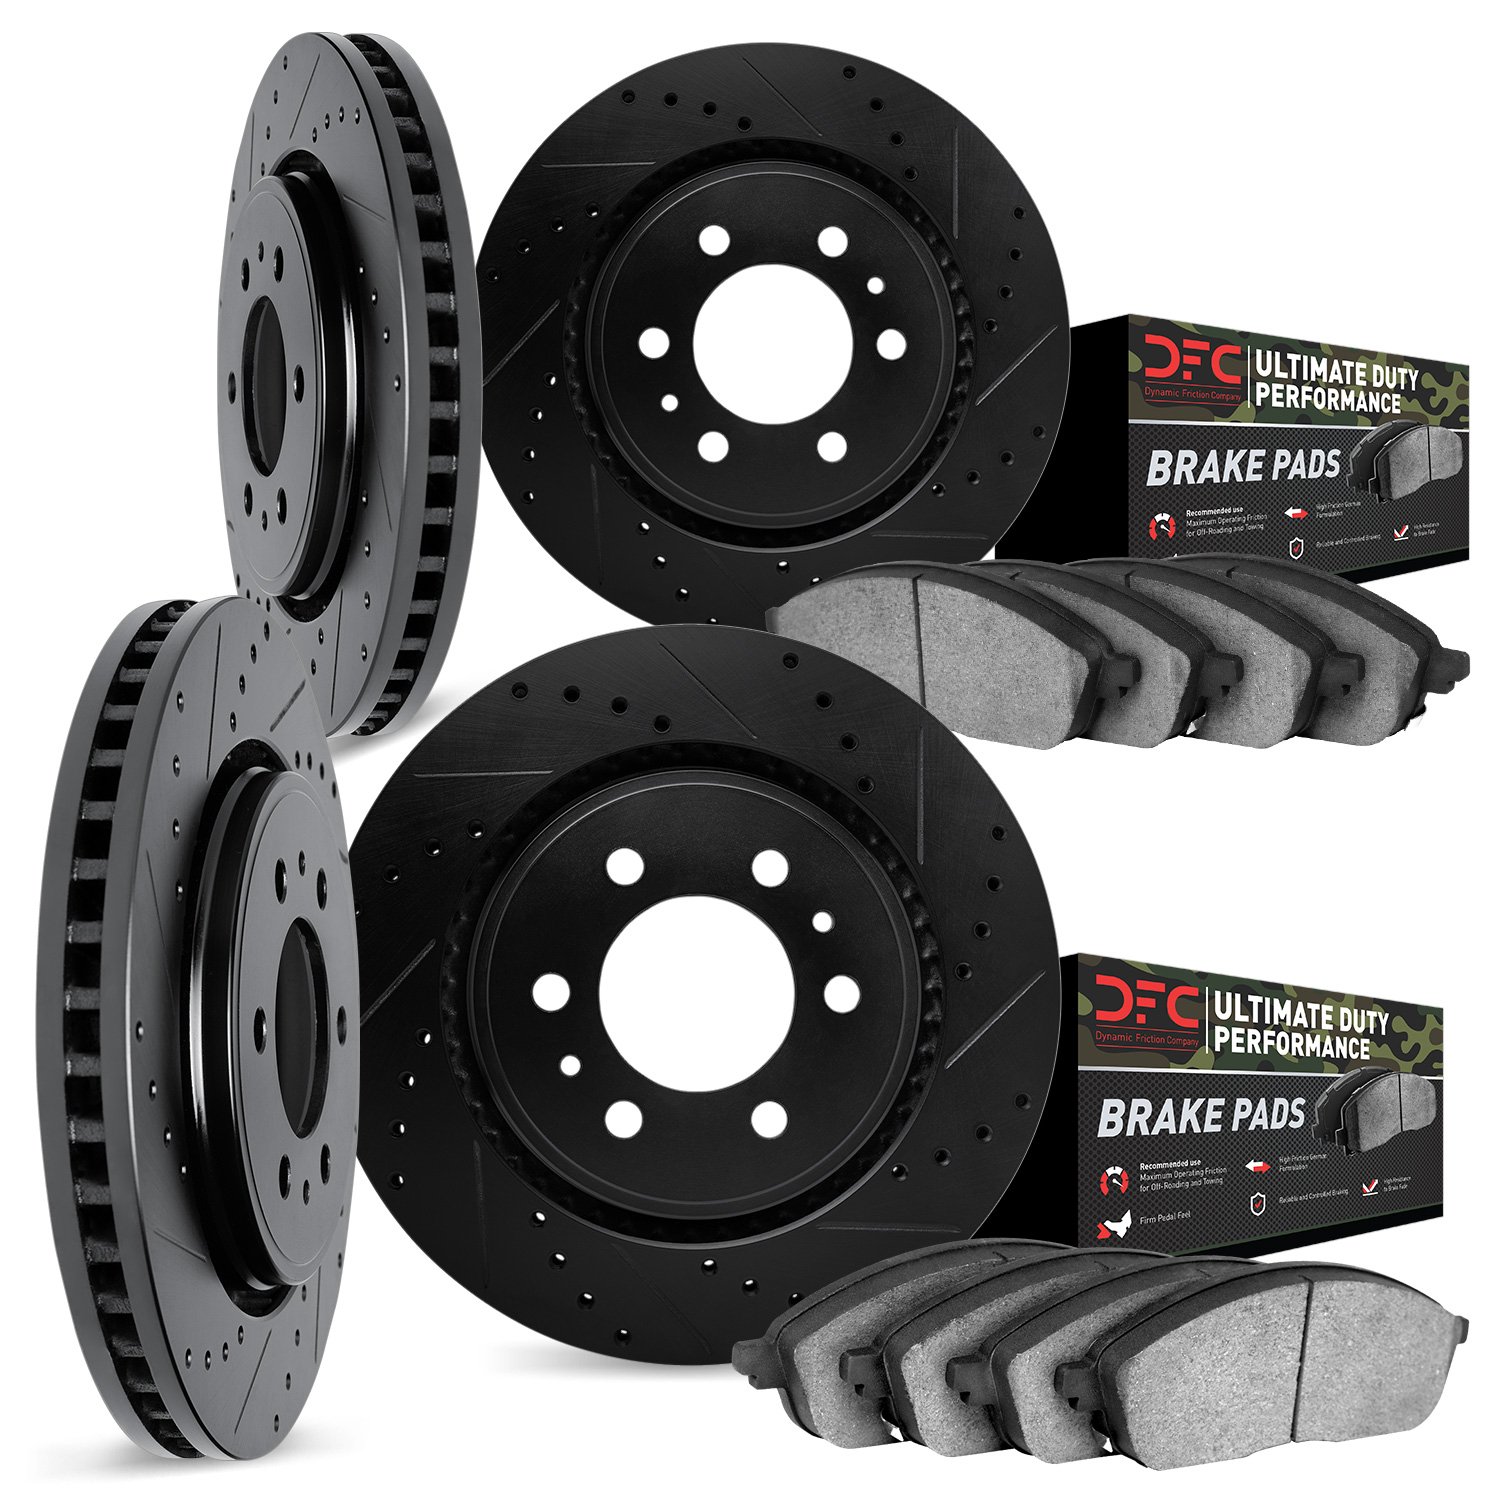 8404-76001 Drilled/Slotted Brake Rotors with Ultimate-Duty Brake Pads Kit [Black], 2001-2002 Lexus/Toyota/Scion, Position: Front